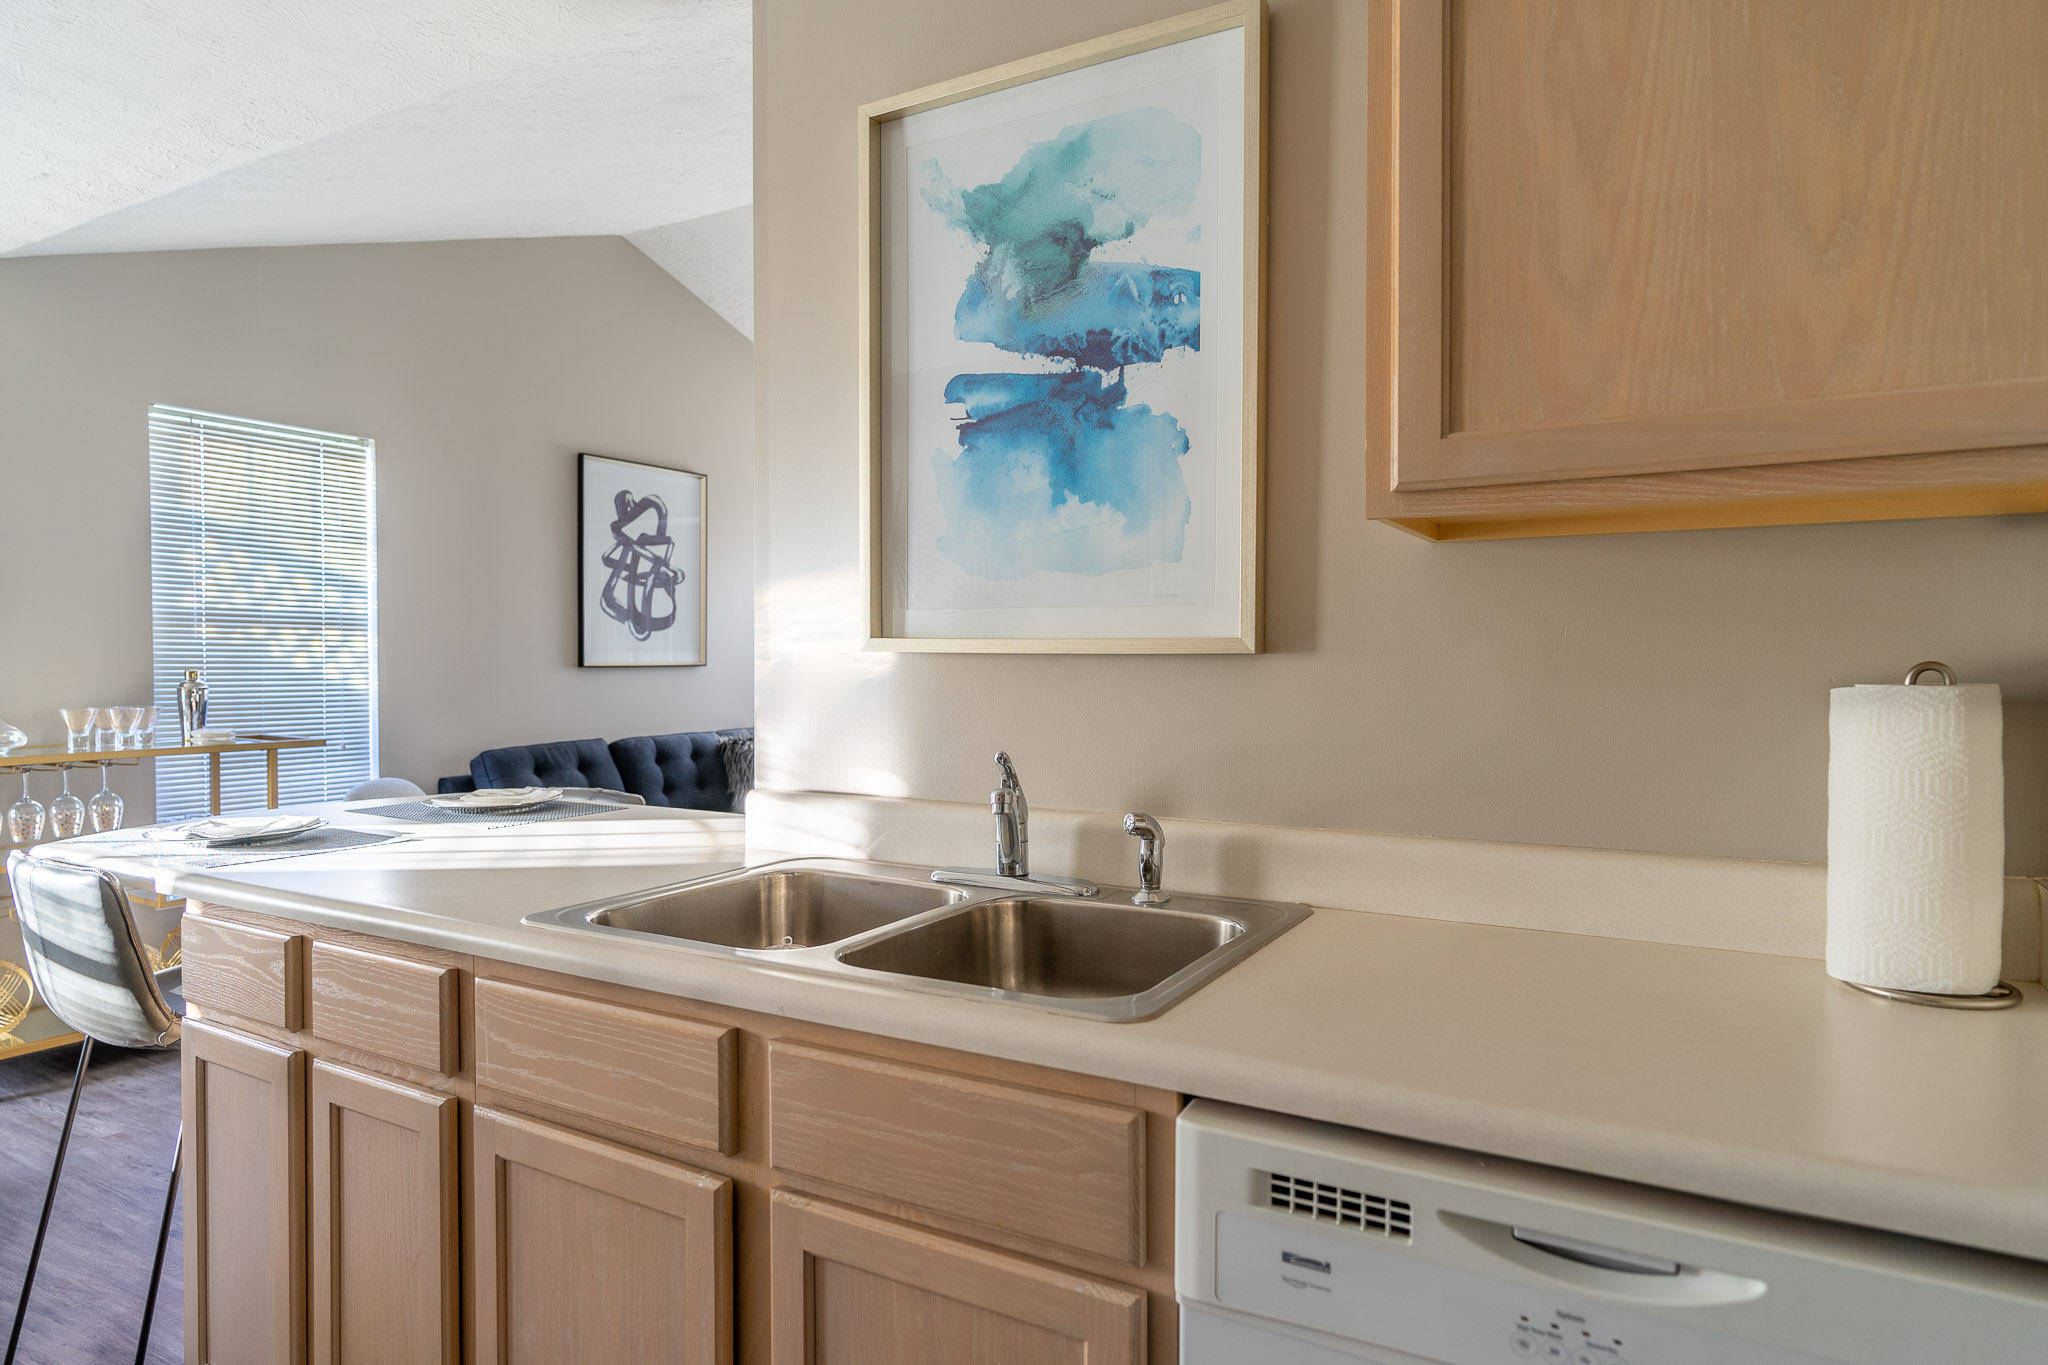 Kitchen and Dining Room at Waterview Townhouse Apartments